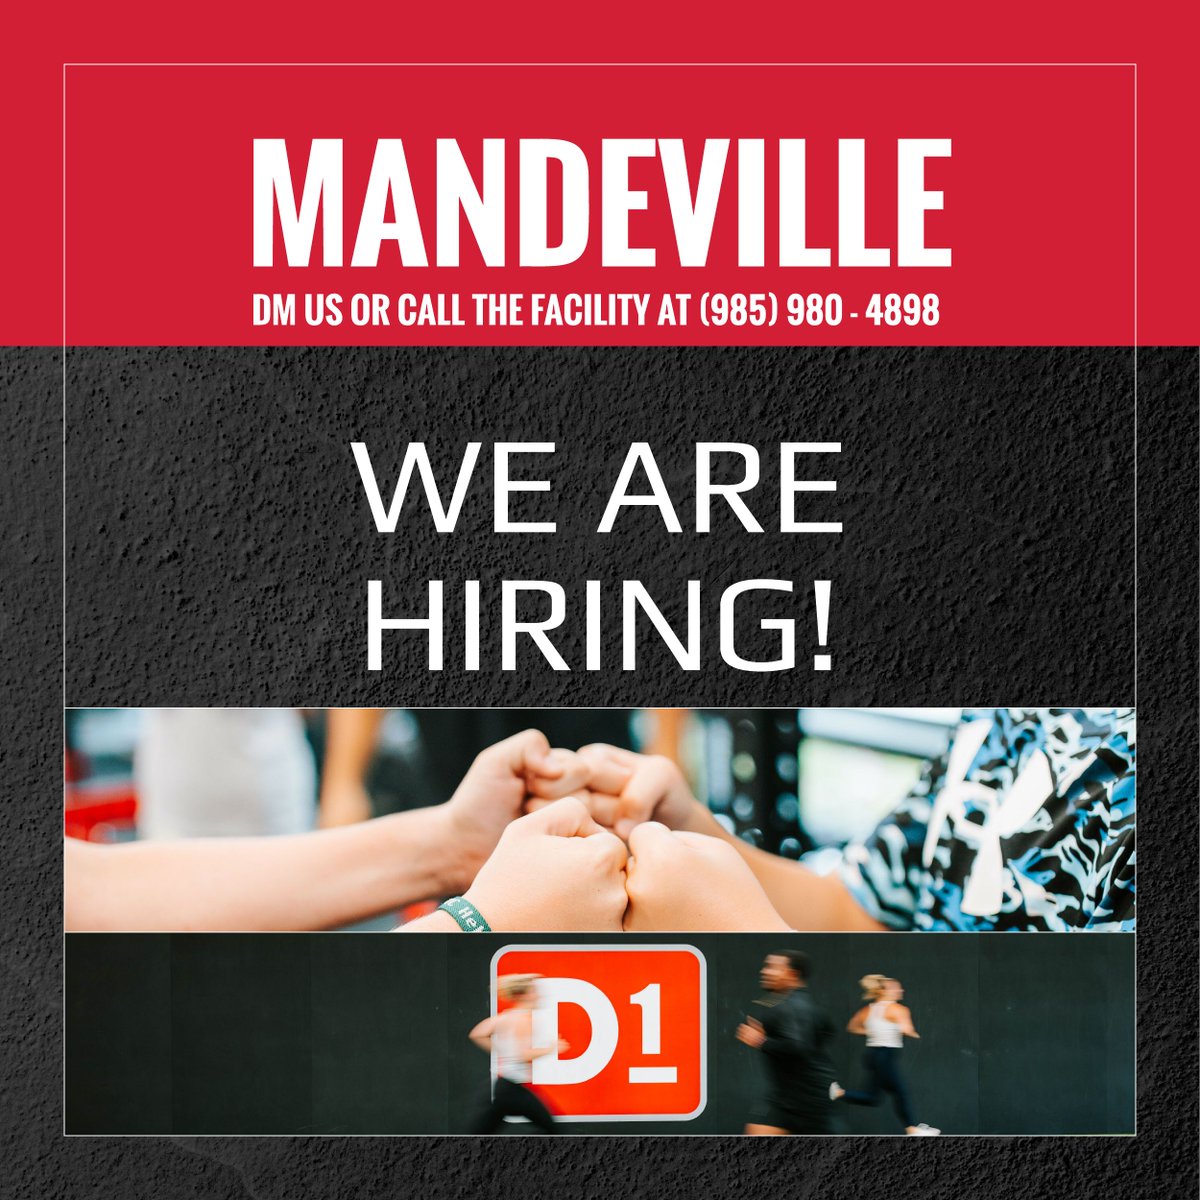 We're in search of passionate coaches who are as excited to serve our community as we are! If this sounds like you, don't hesitate to drop us a direct message or ring us up at 985-980-4898.
#traind1fferent #D1Mandeville #d1sports